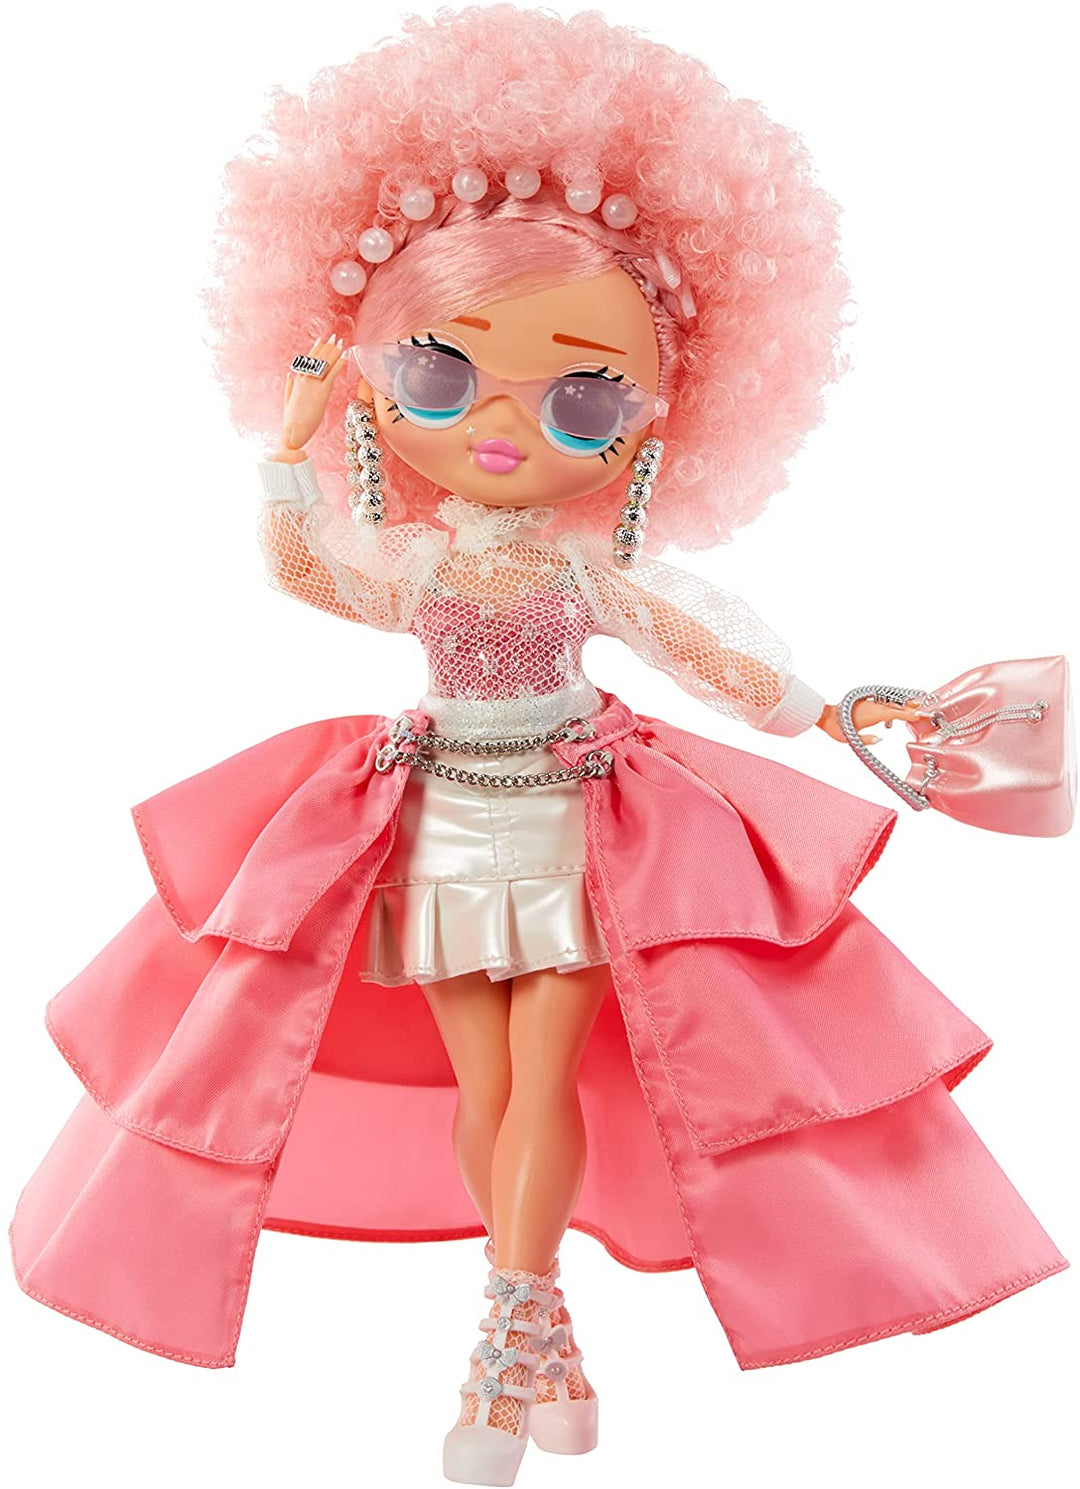 LOL Surprise OMG Present Surprise Series 2 Fashion Doll - MISS CELEBRATE - With